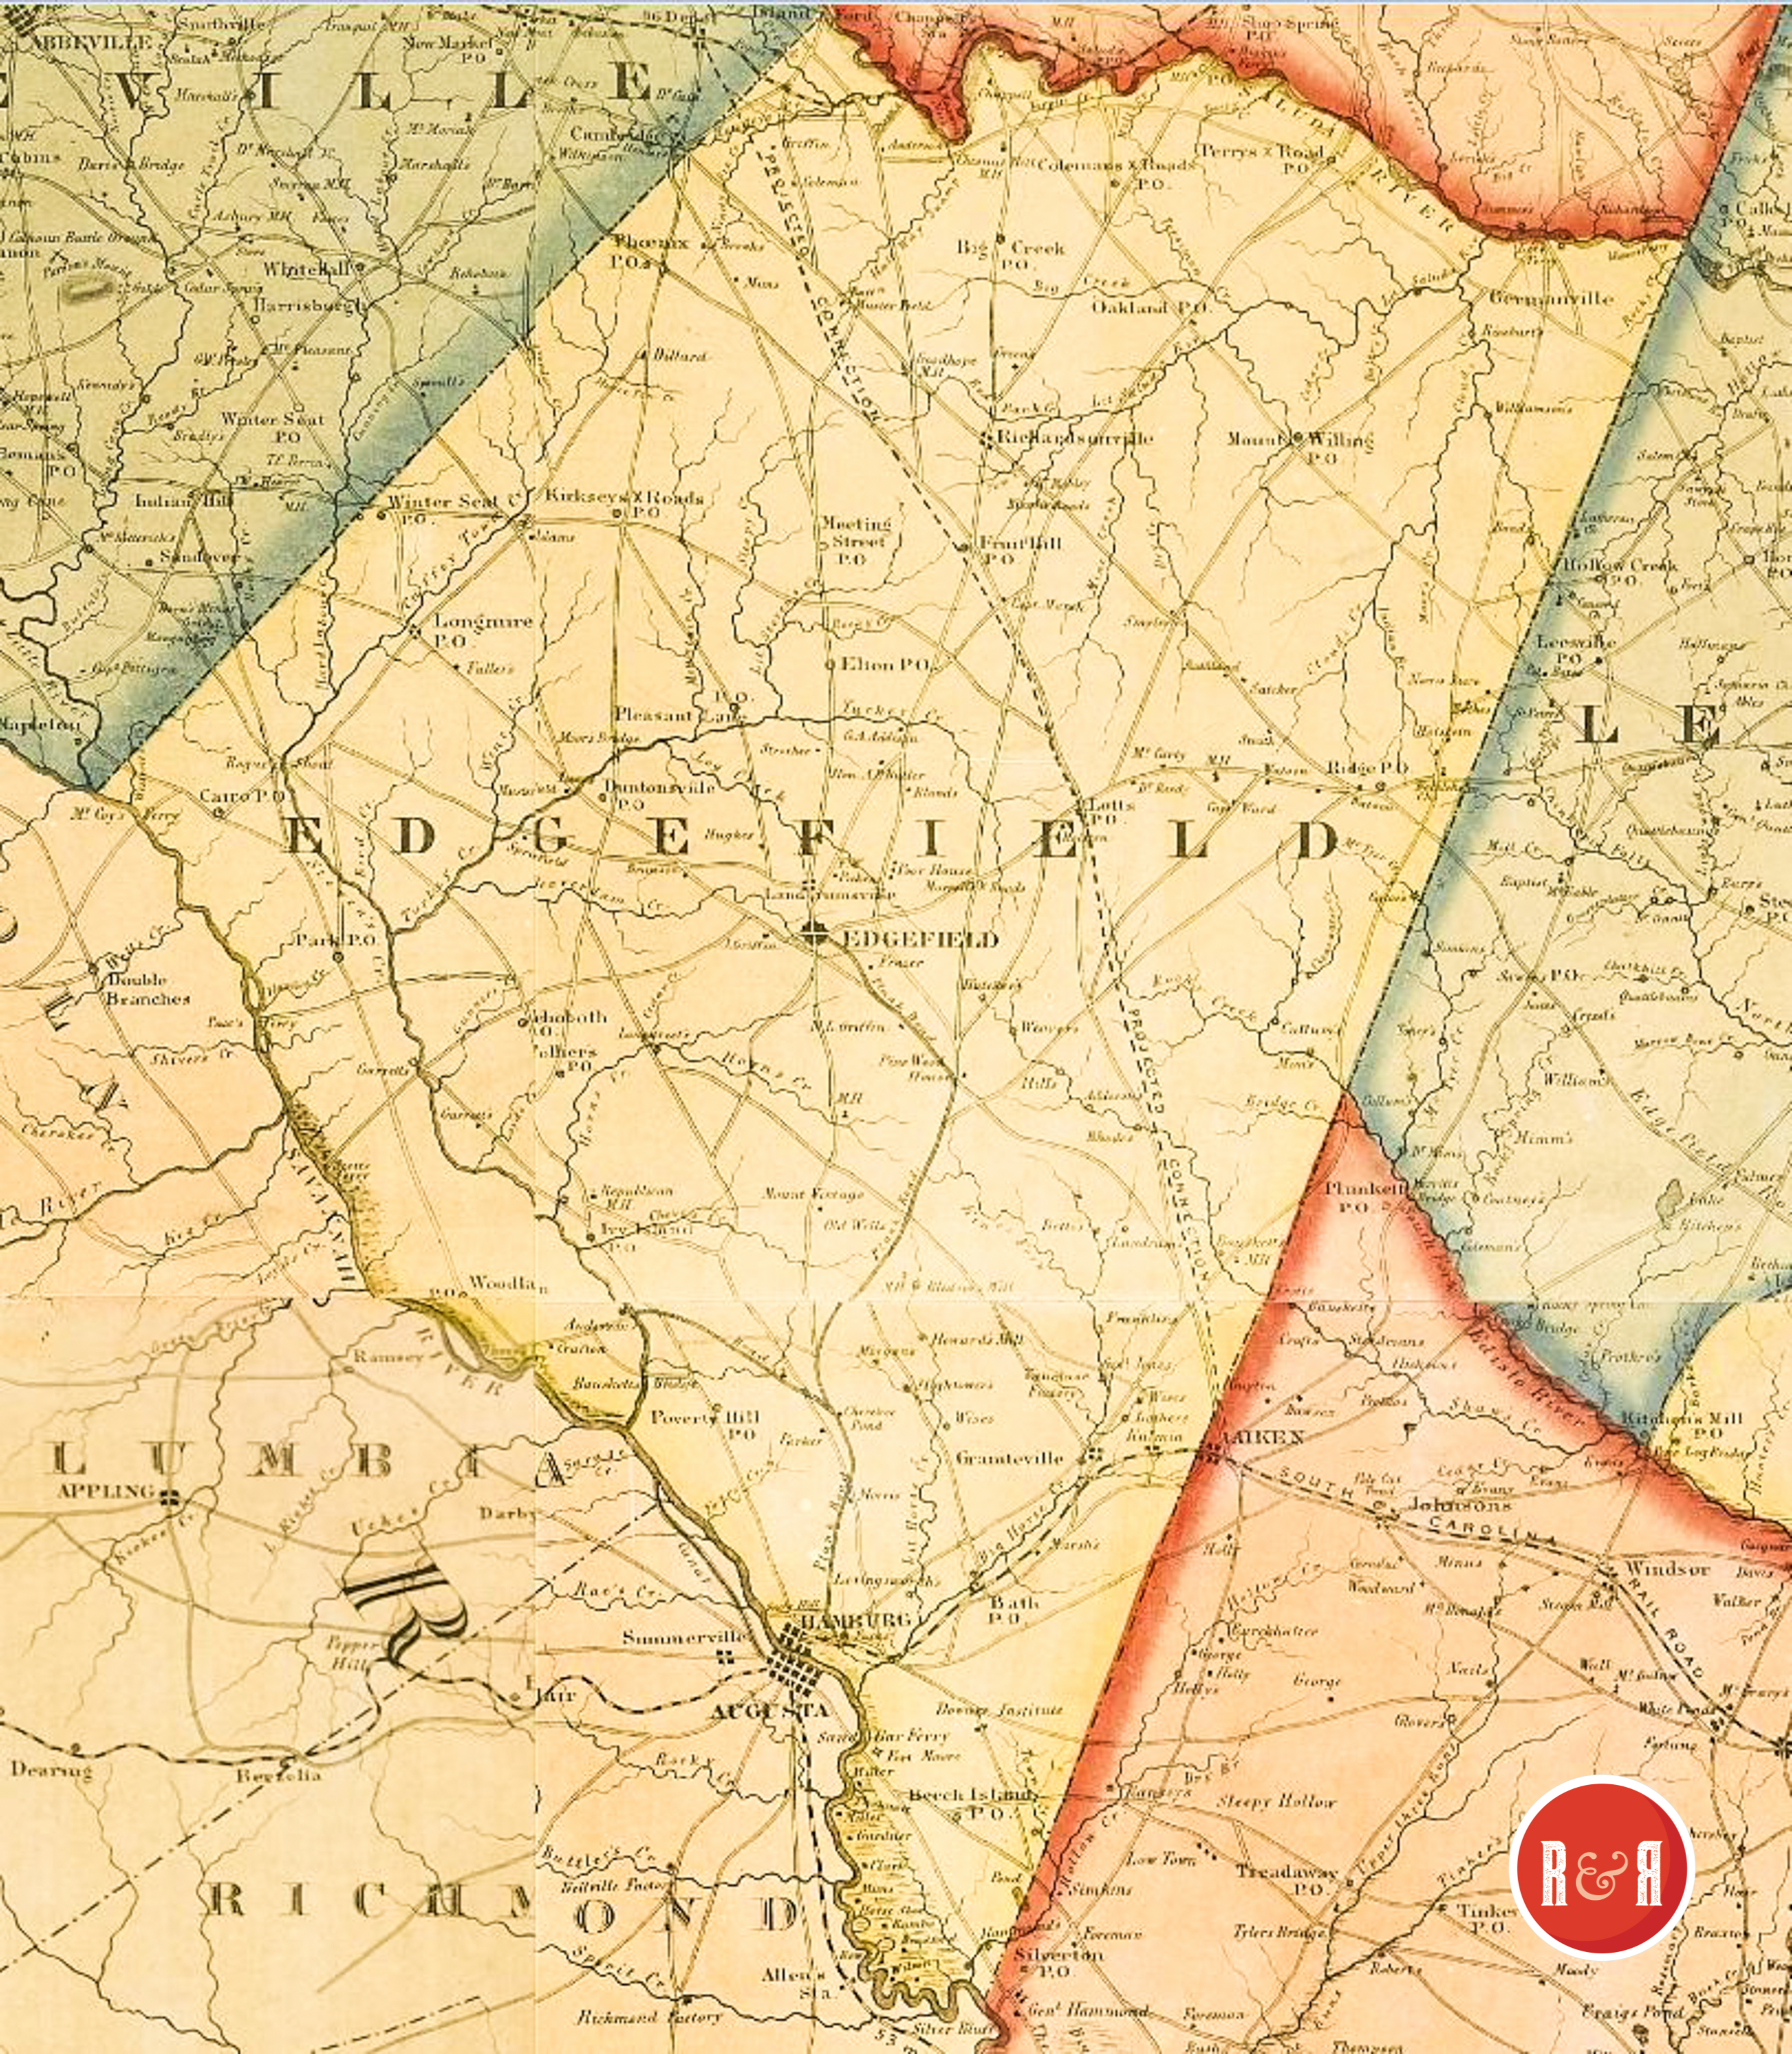 Colton's 1854 Map of Edgefield County - Enlargement